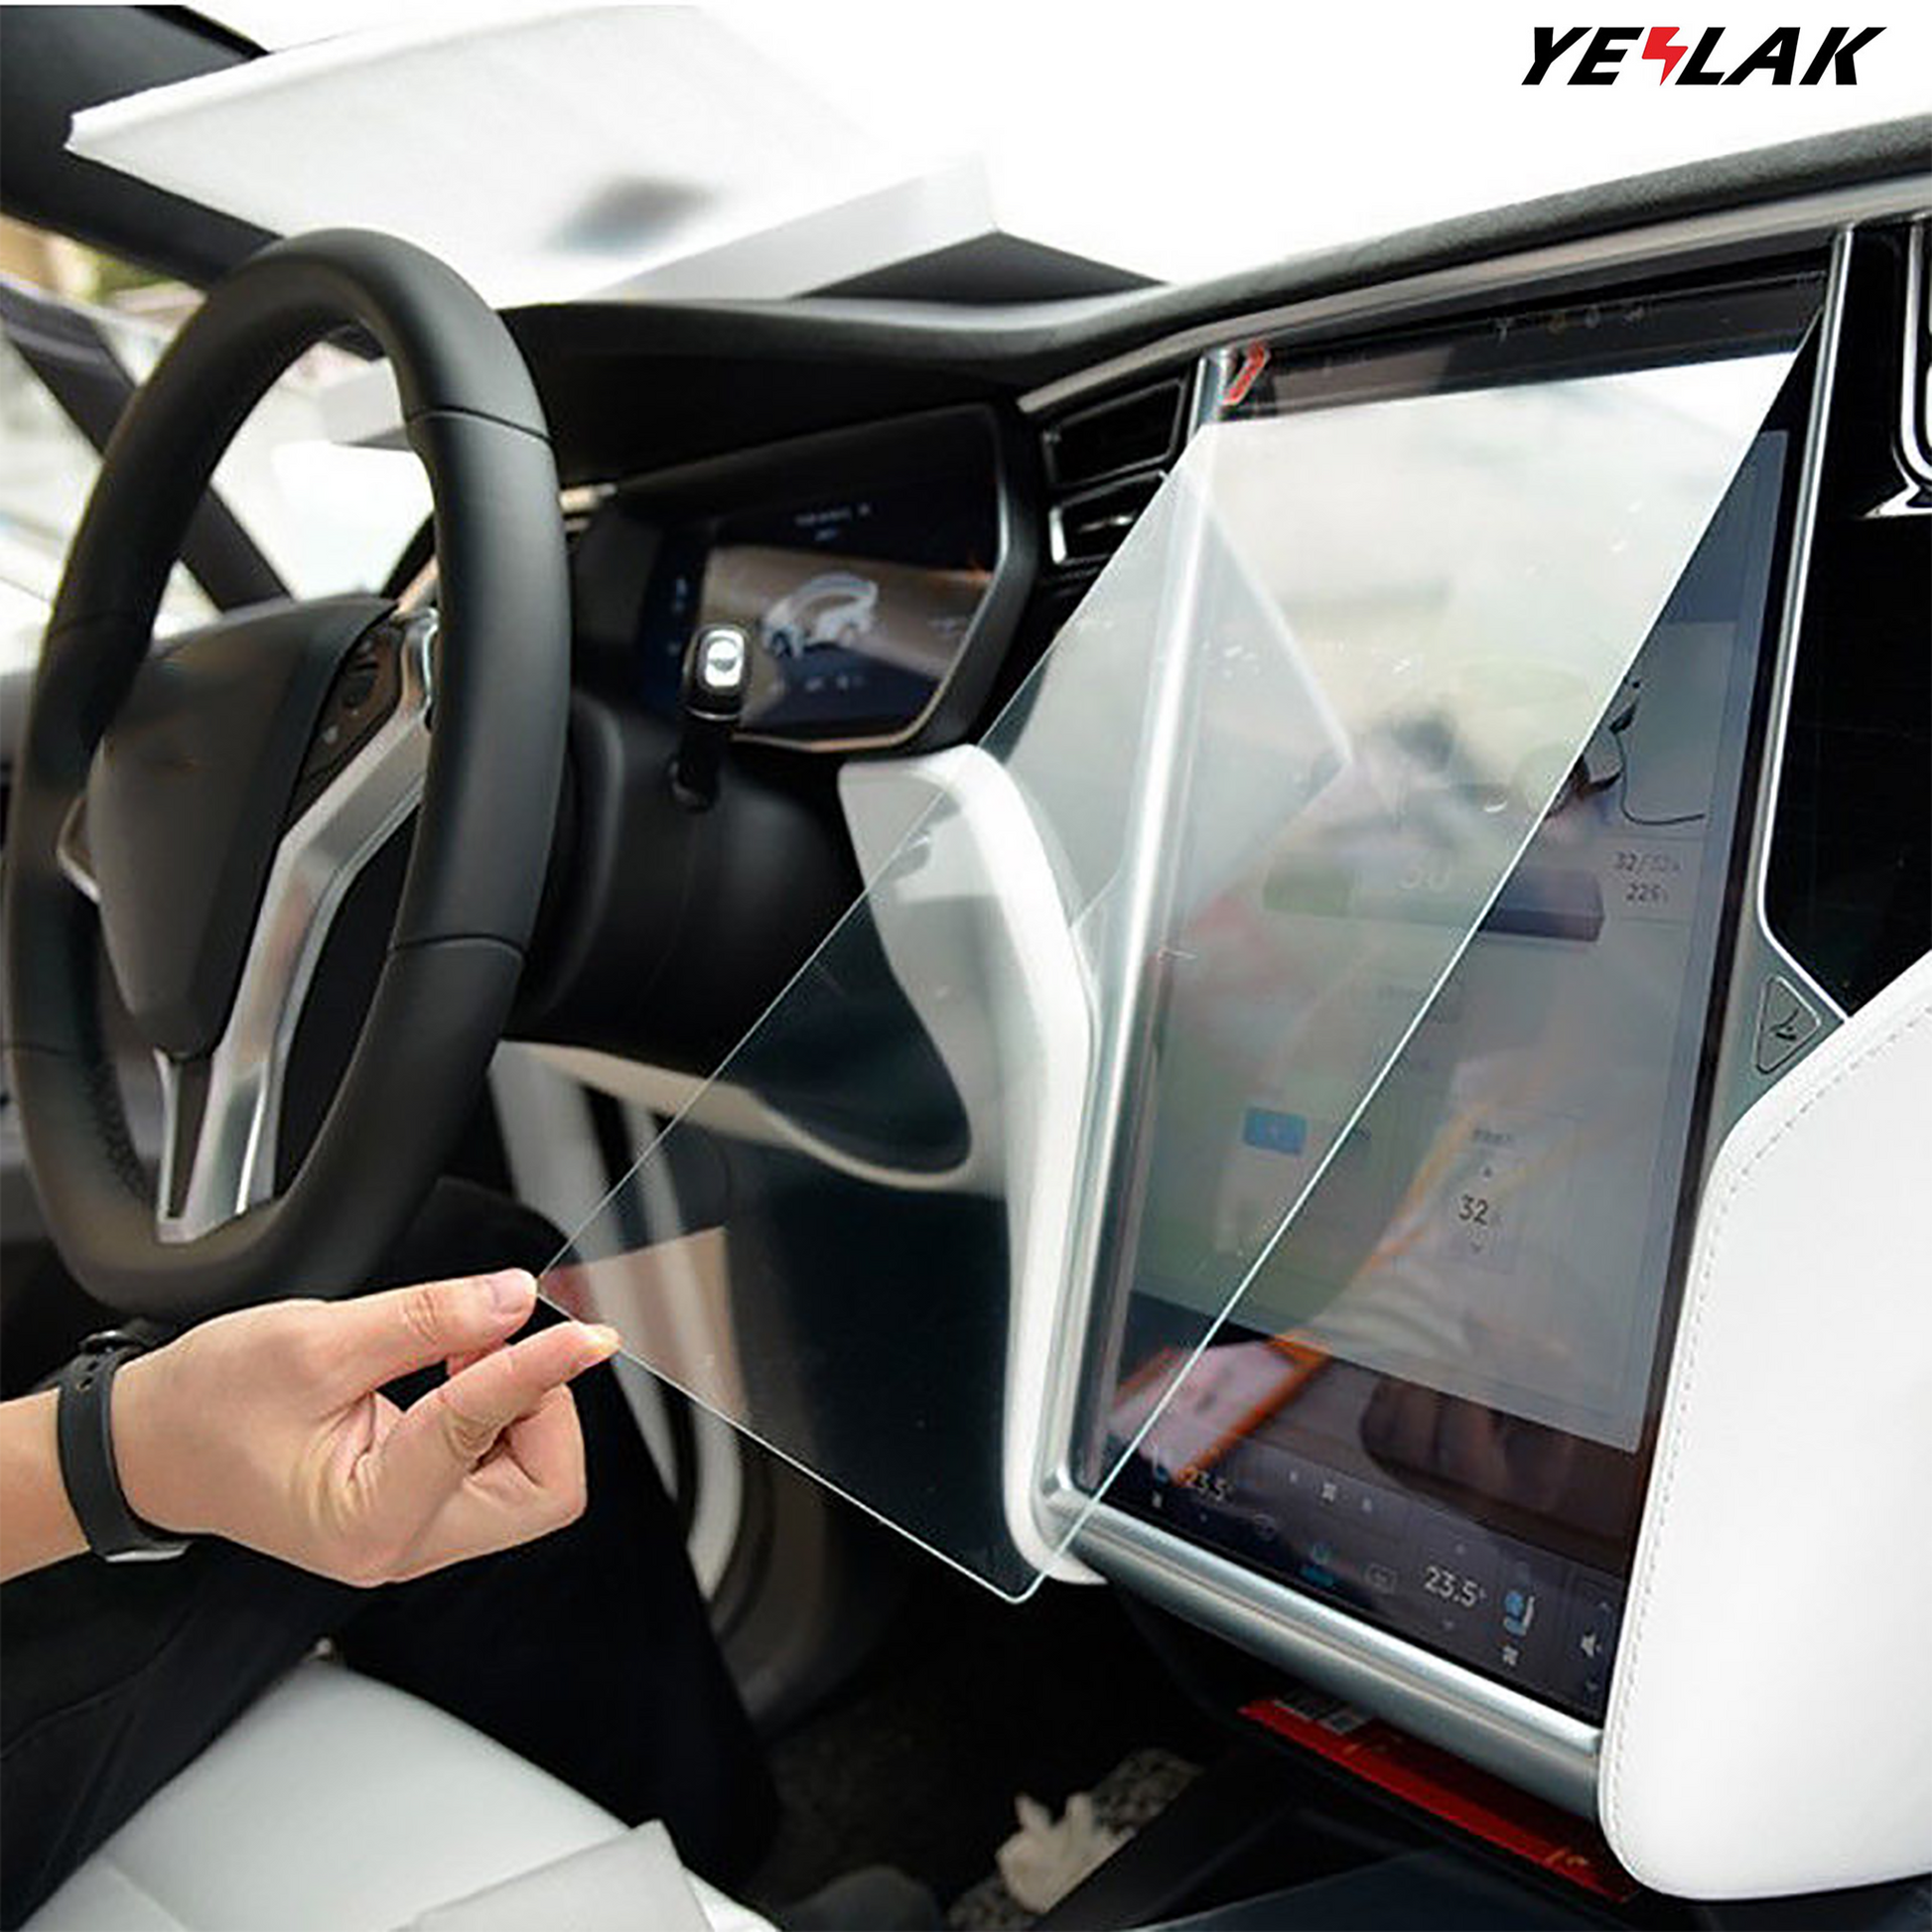 Tempered Glass Screen Protector for Telsa Model X/S-Motor Vehicle Interior Fittings-Yeslak